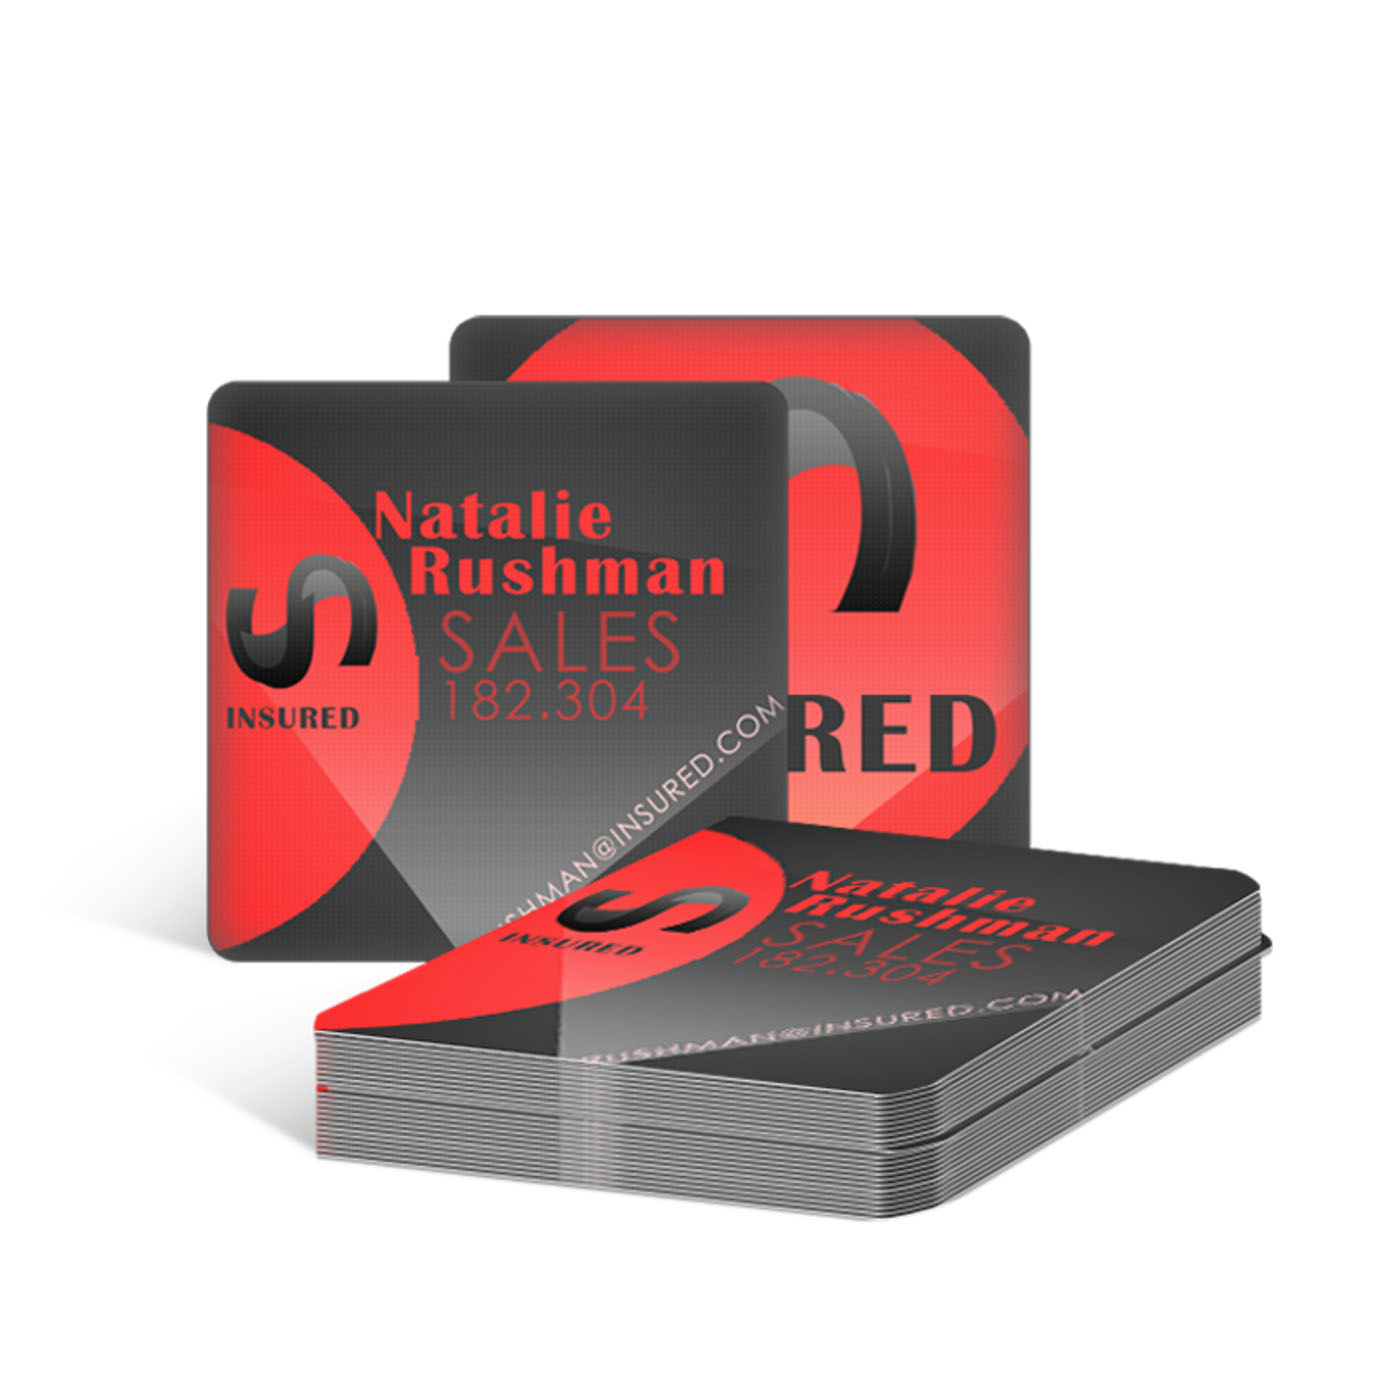 rounded corner square business cards 1